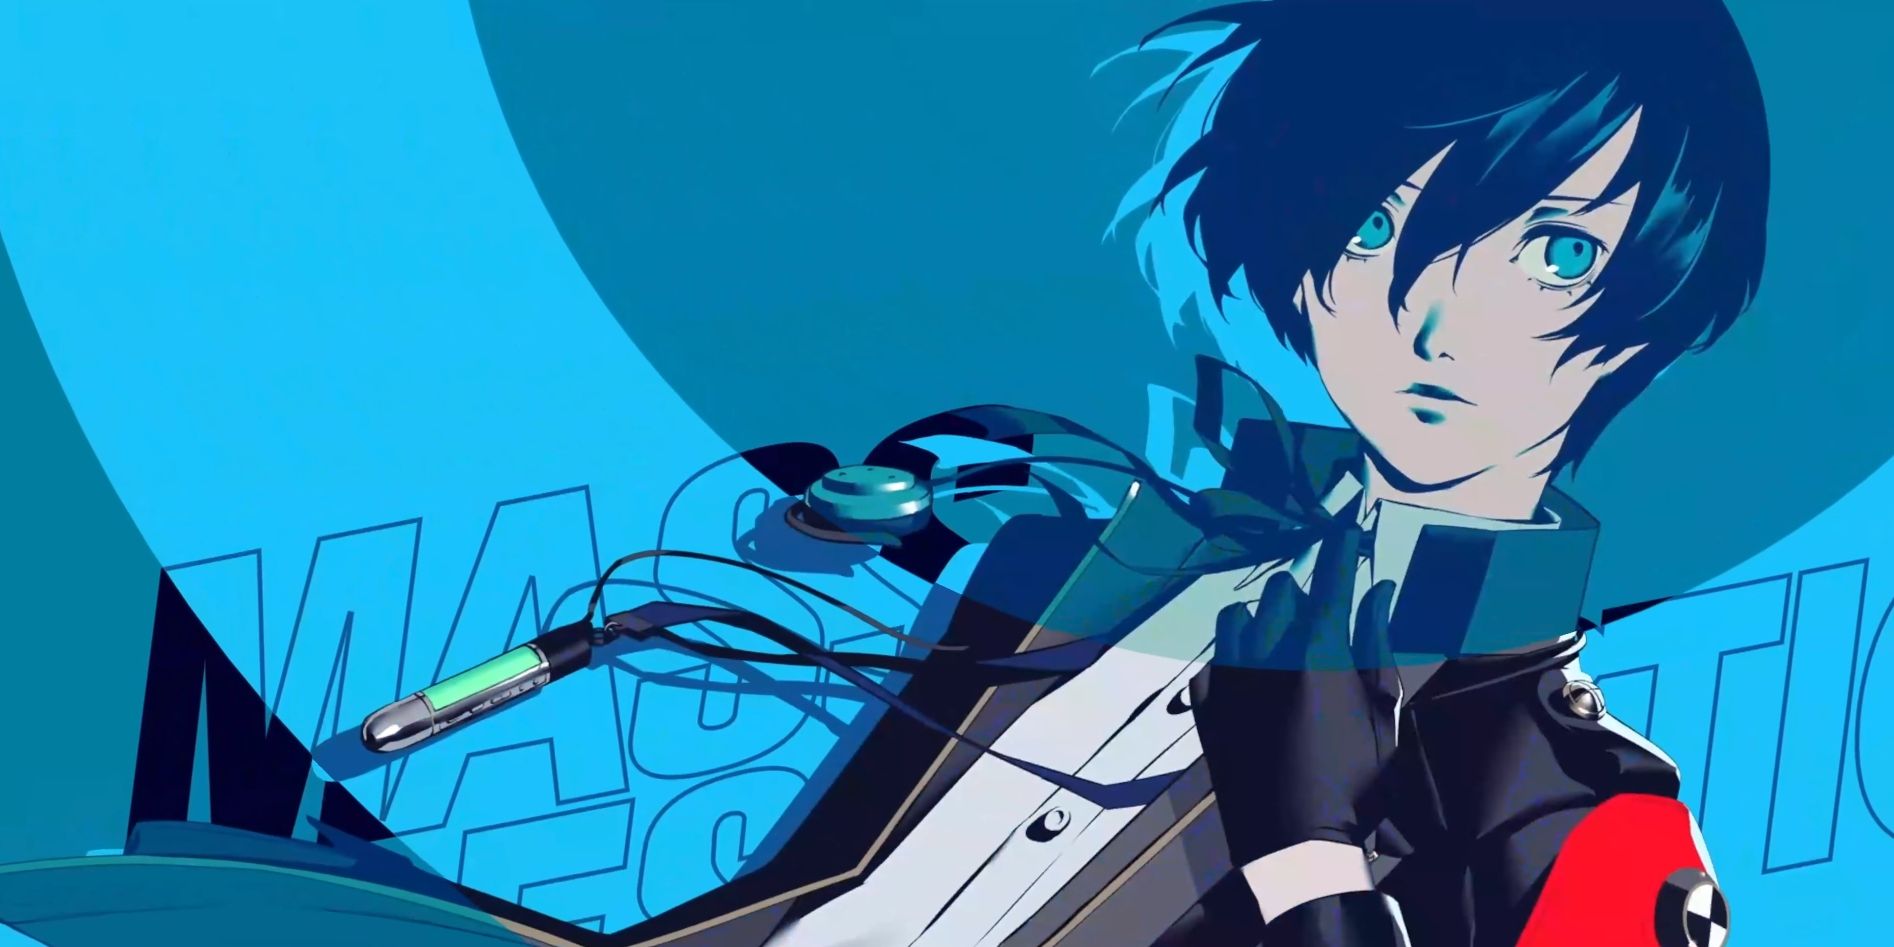 Persona 3 Reload' Game unveils new trailer featuring Ken with